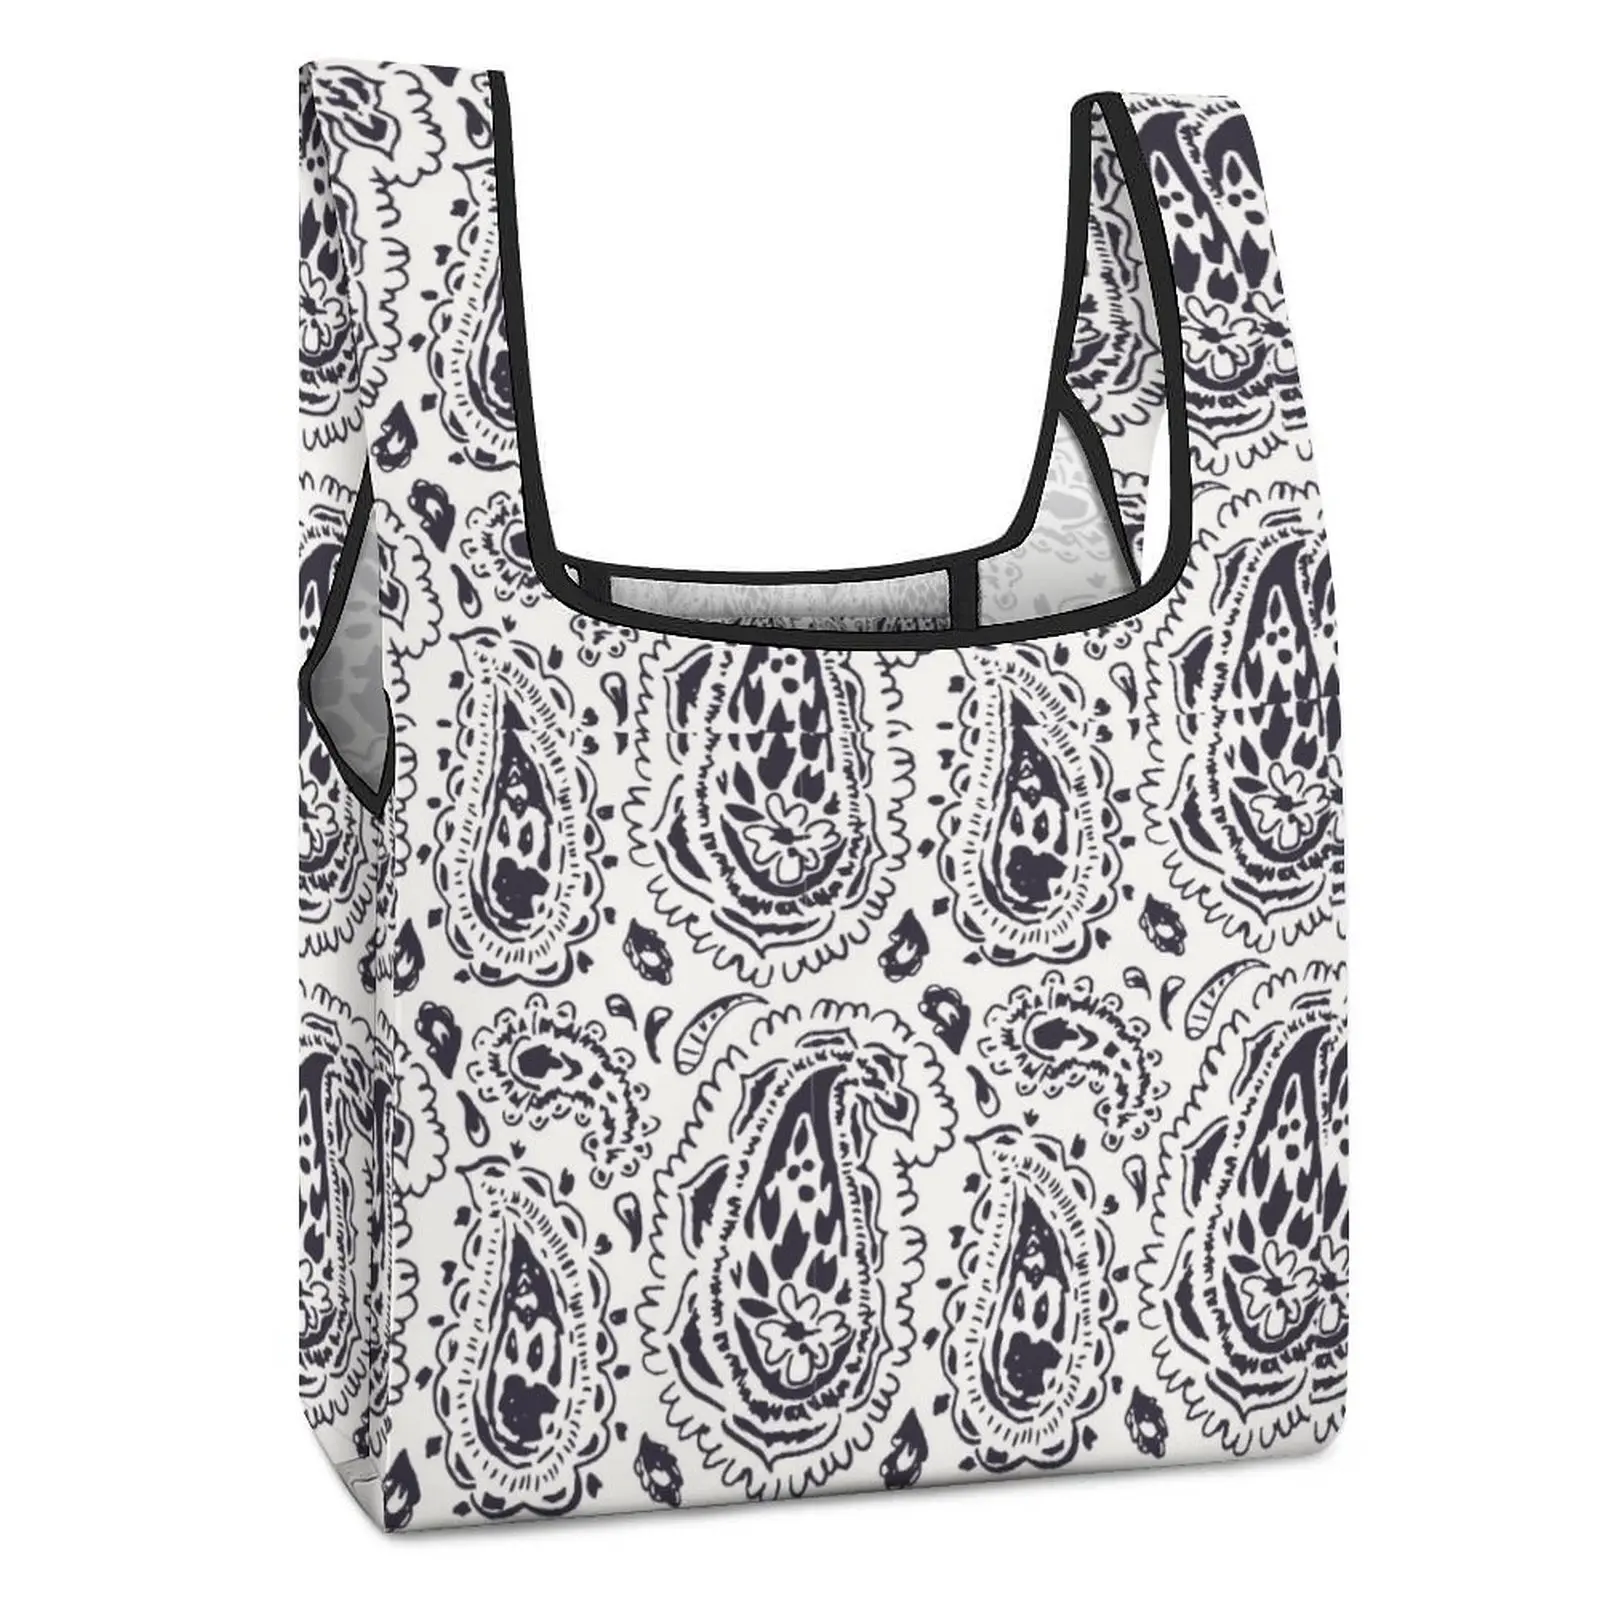 Customized Printed Large Shopping Bag Double Strap Handbag Tote with Handles Casual Woman Grocery Bag Custom Pattern